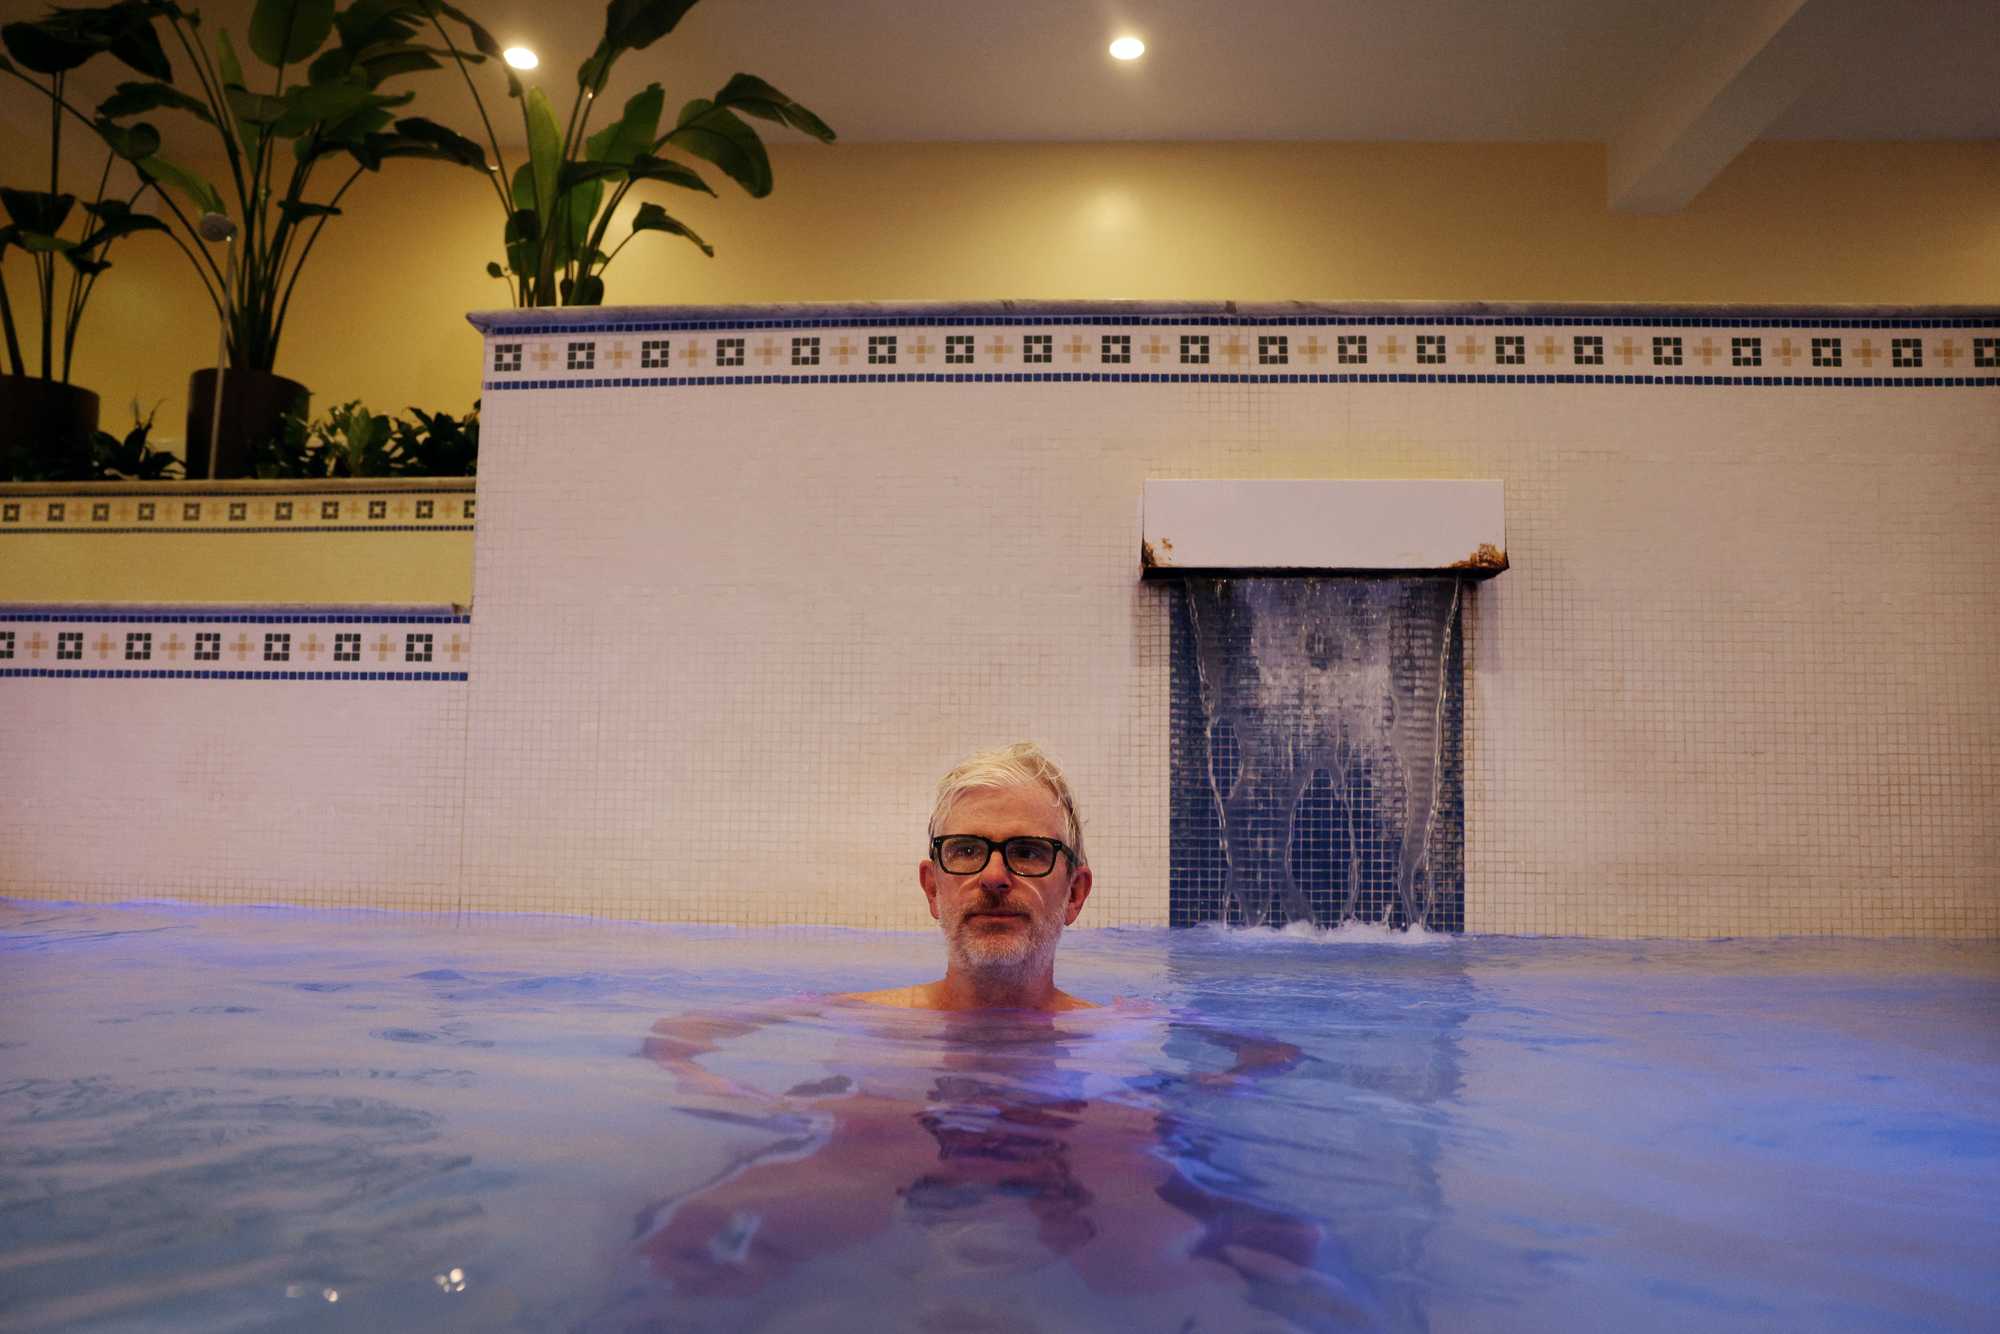 Globe staffer Mark Shanahan sought relief at the Quapaw Baths & Spa after some long days on the road. 

